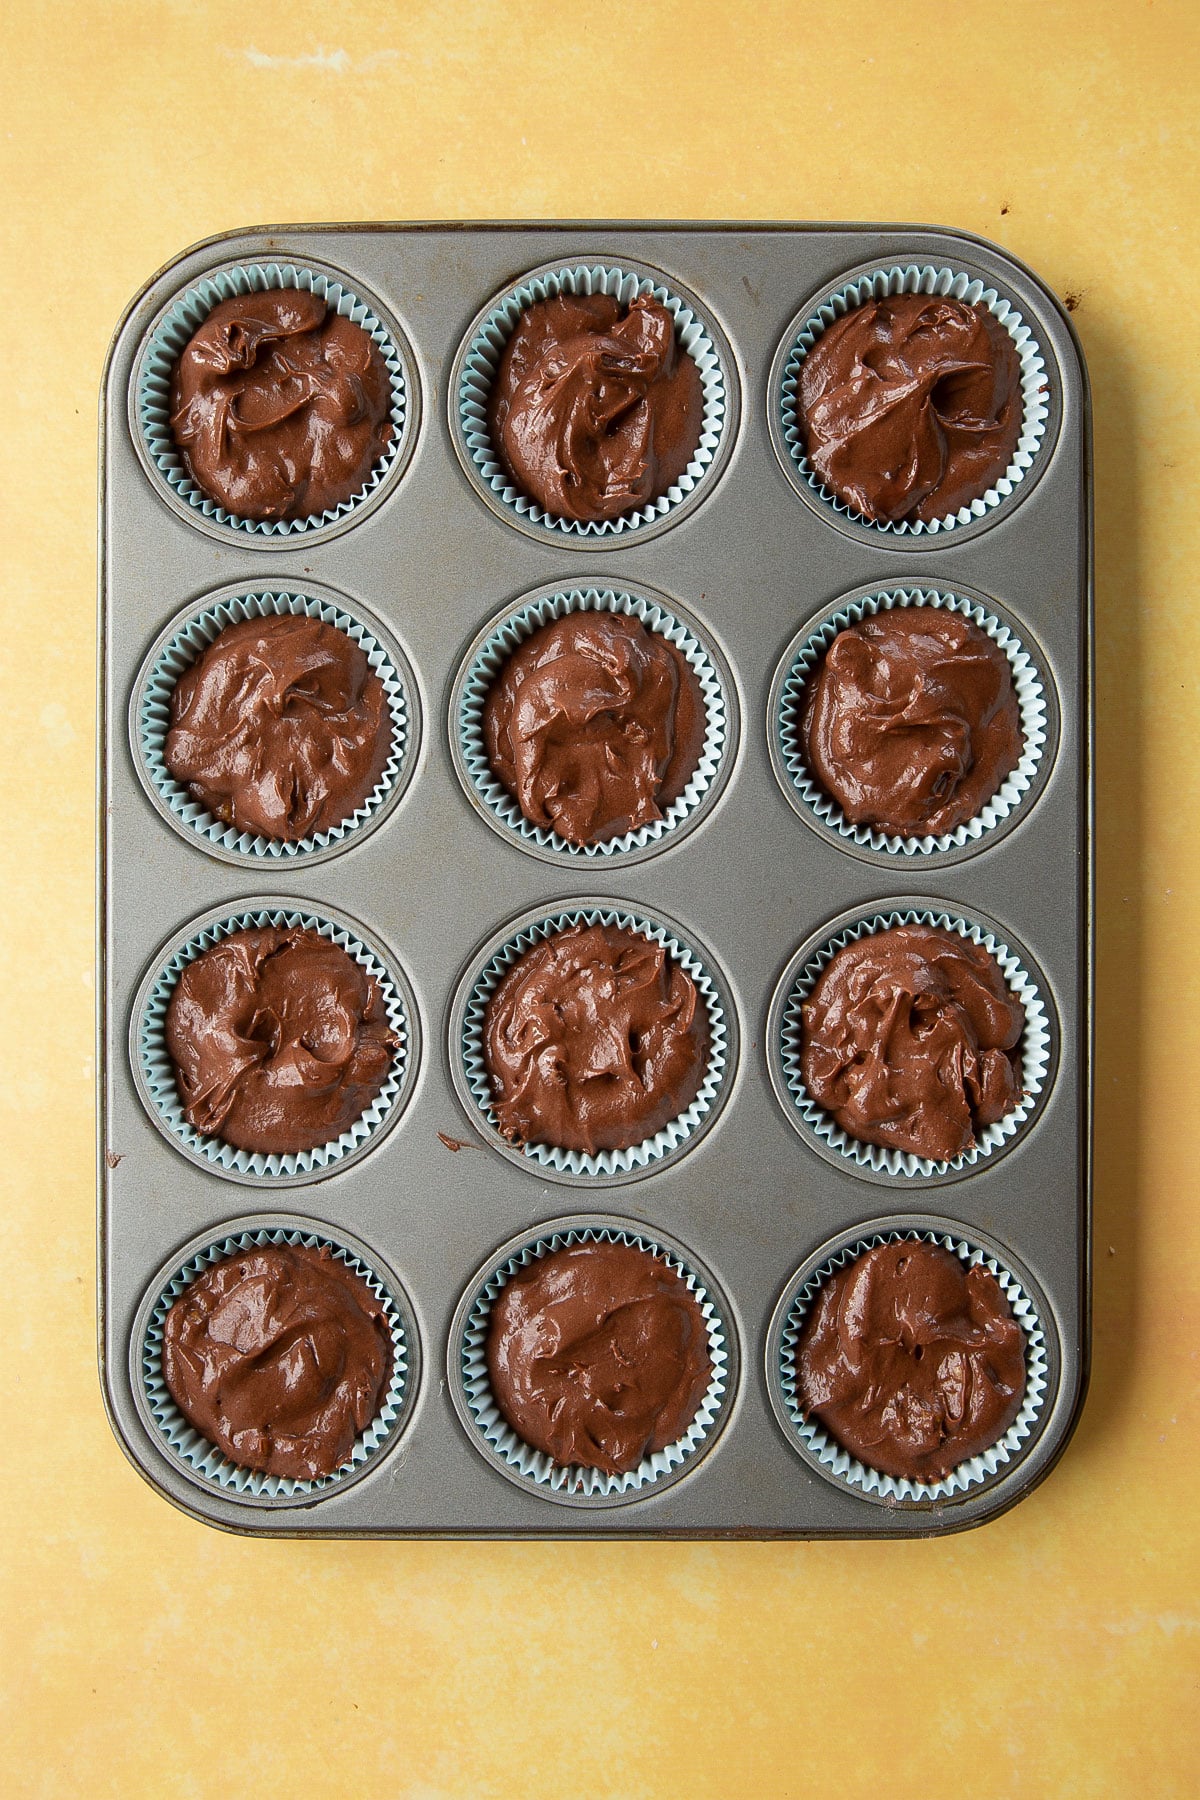 Chocolate walnut cupcake batter spooned into 12-hole muffin tray, lined with cupcake cases.